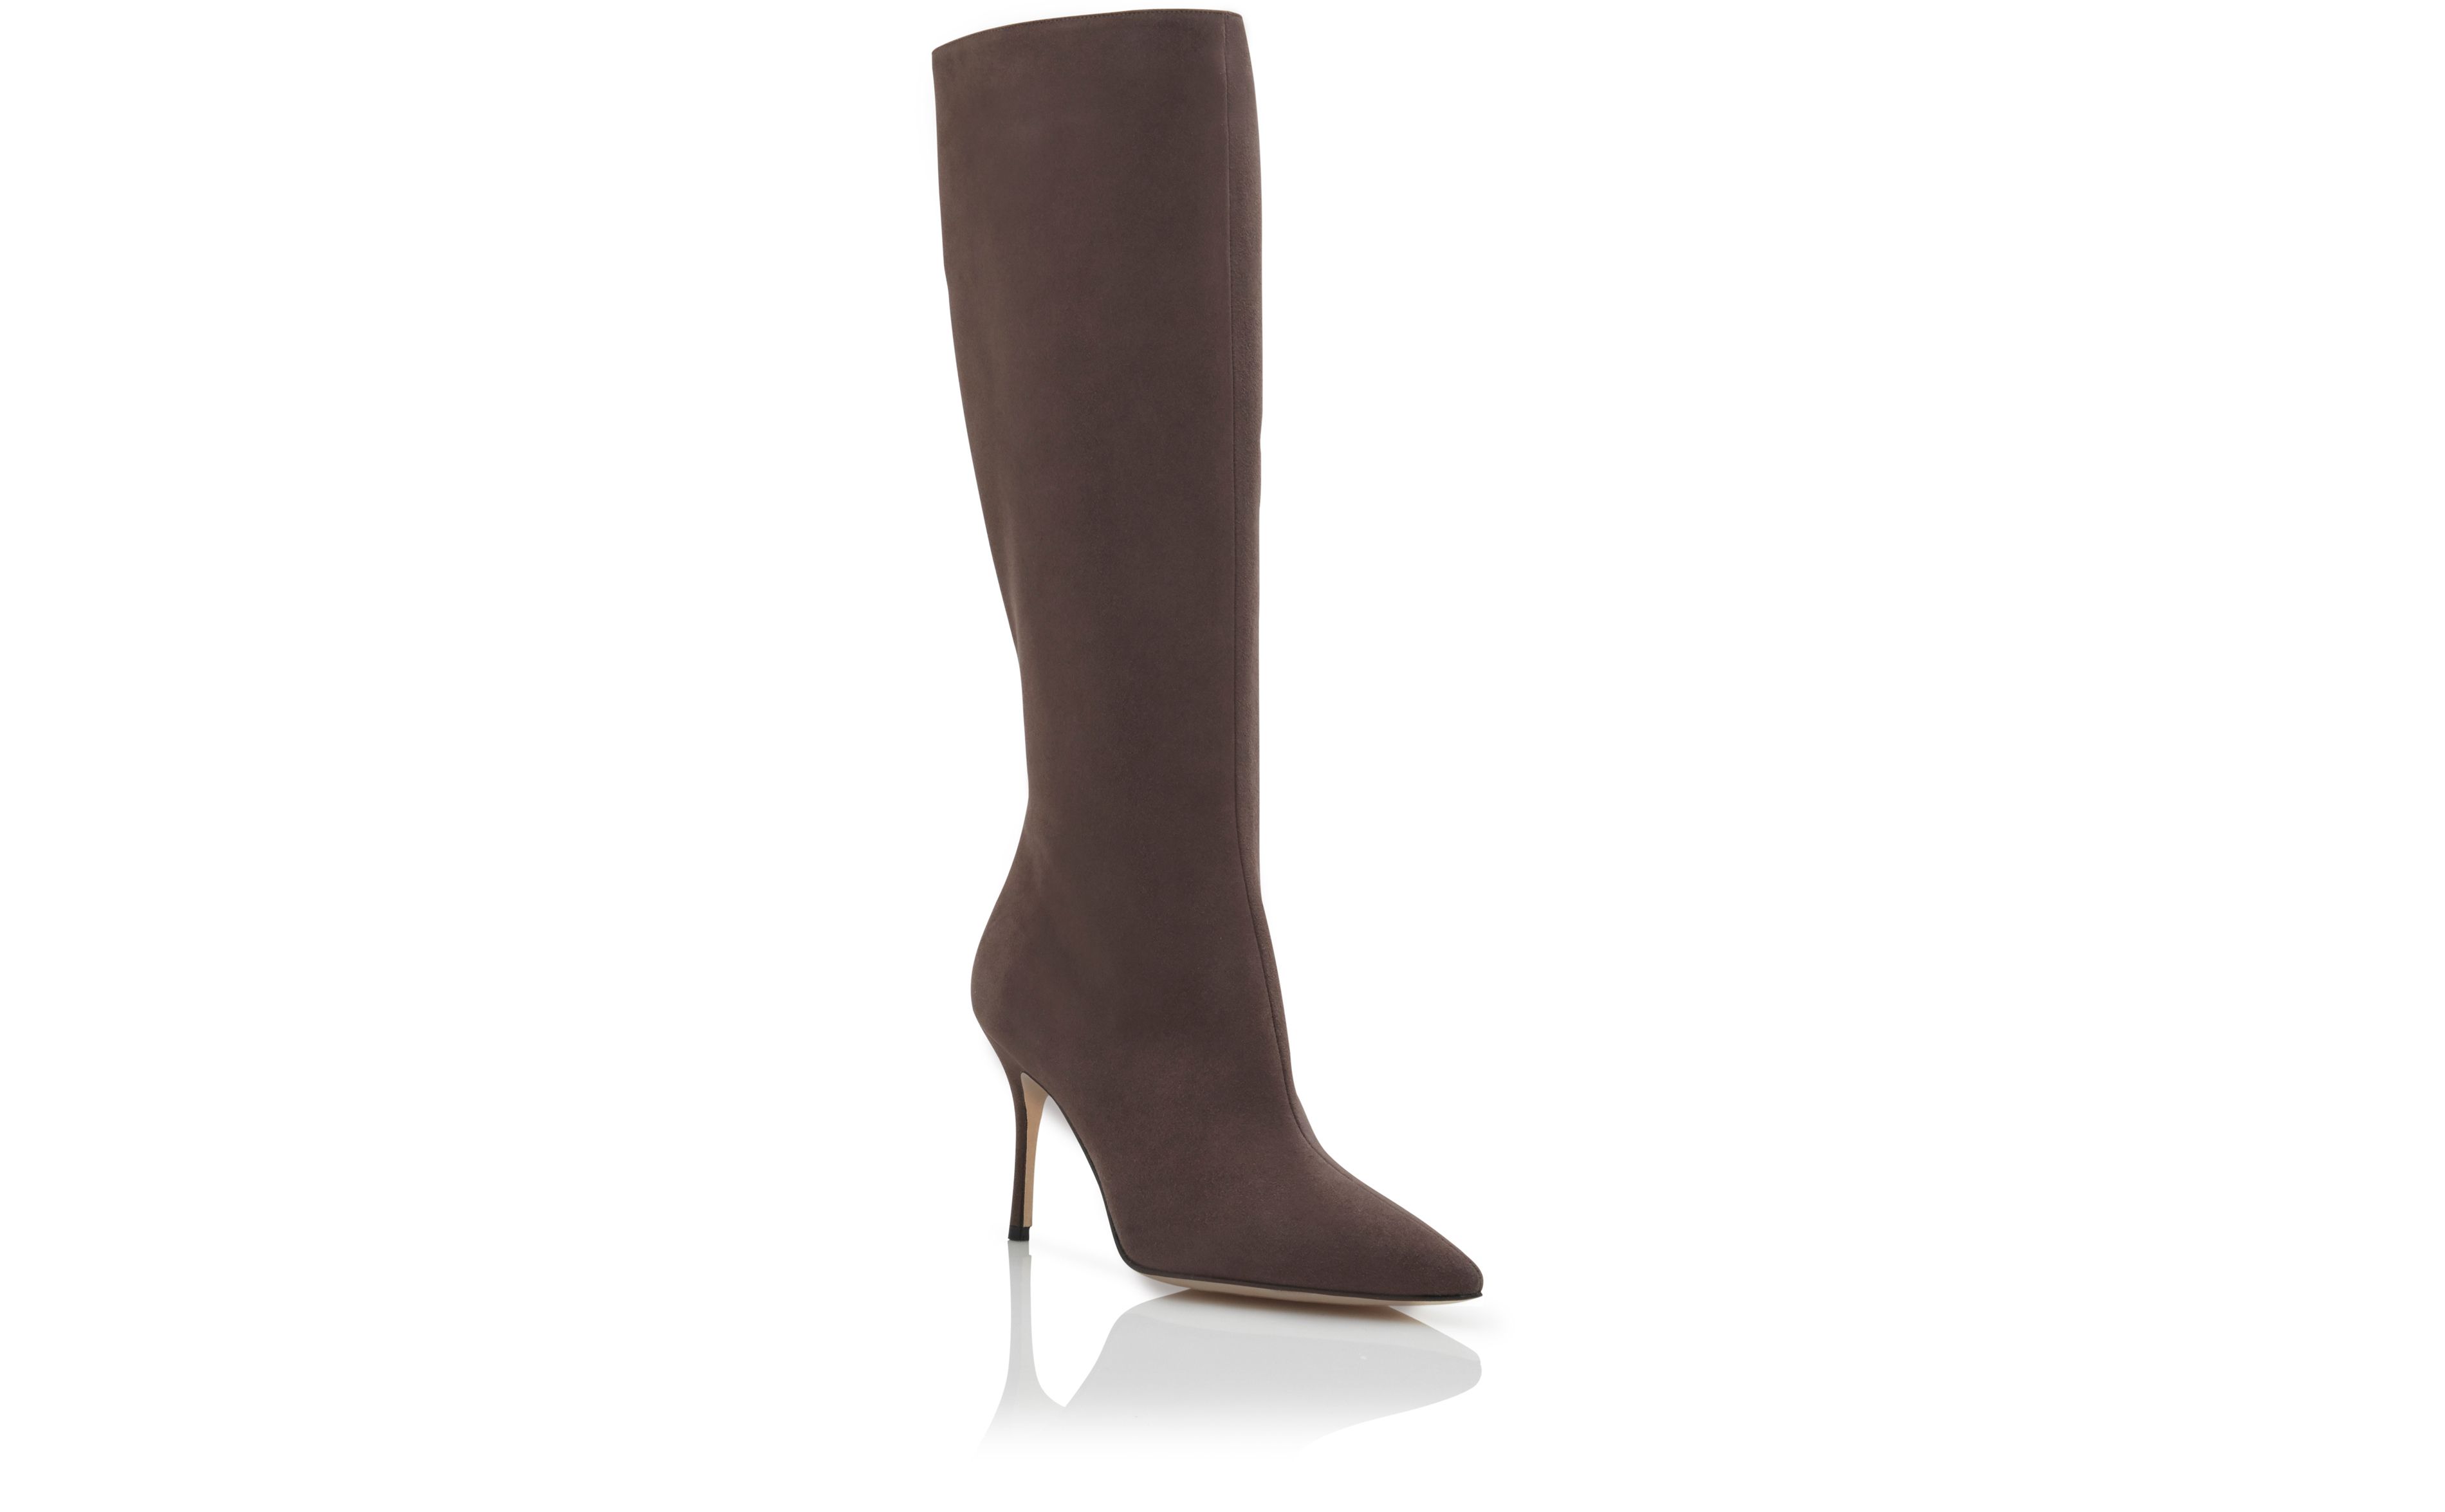 Designer Brown Suede Knee High Boots - Image Upsell